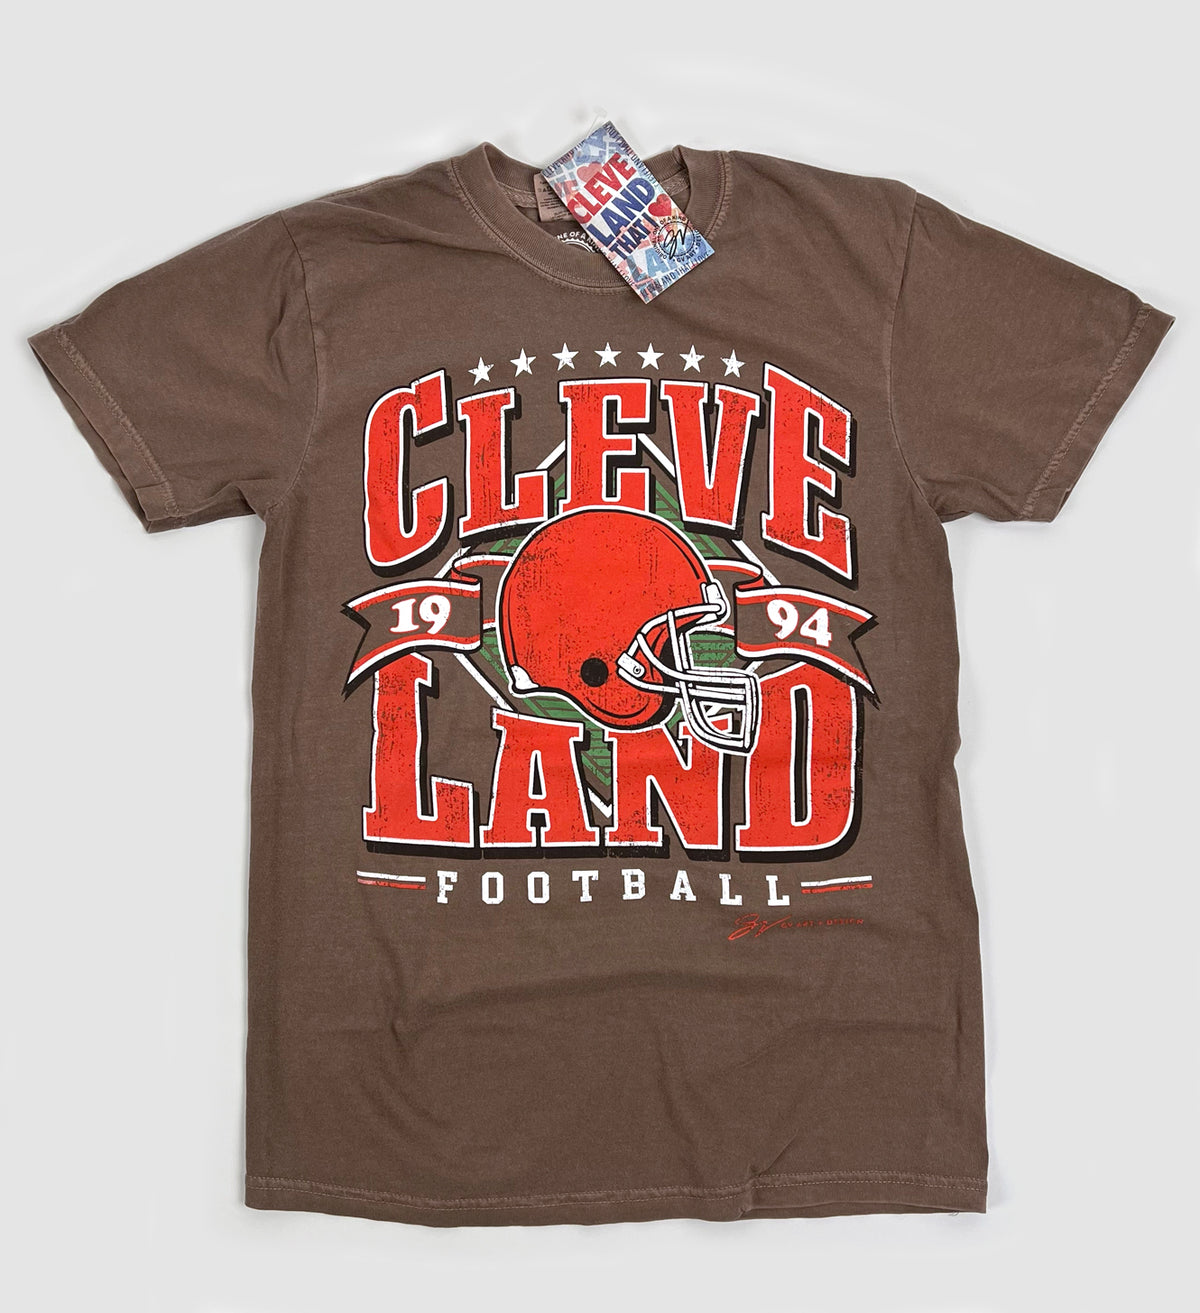 20 of the most popular Cleveland T-shirts in Cleveland 